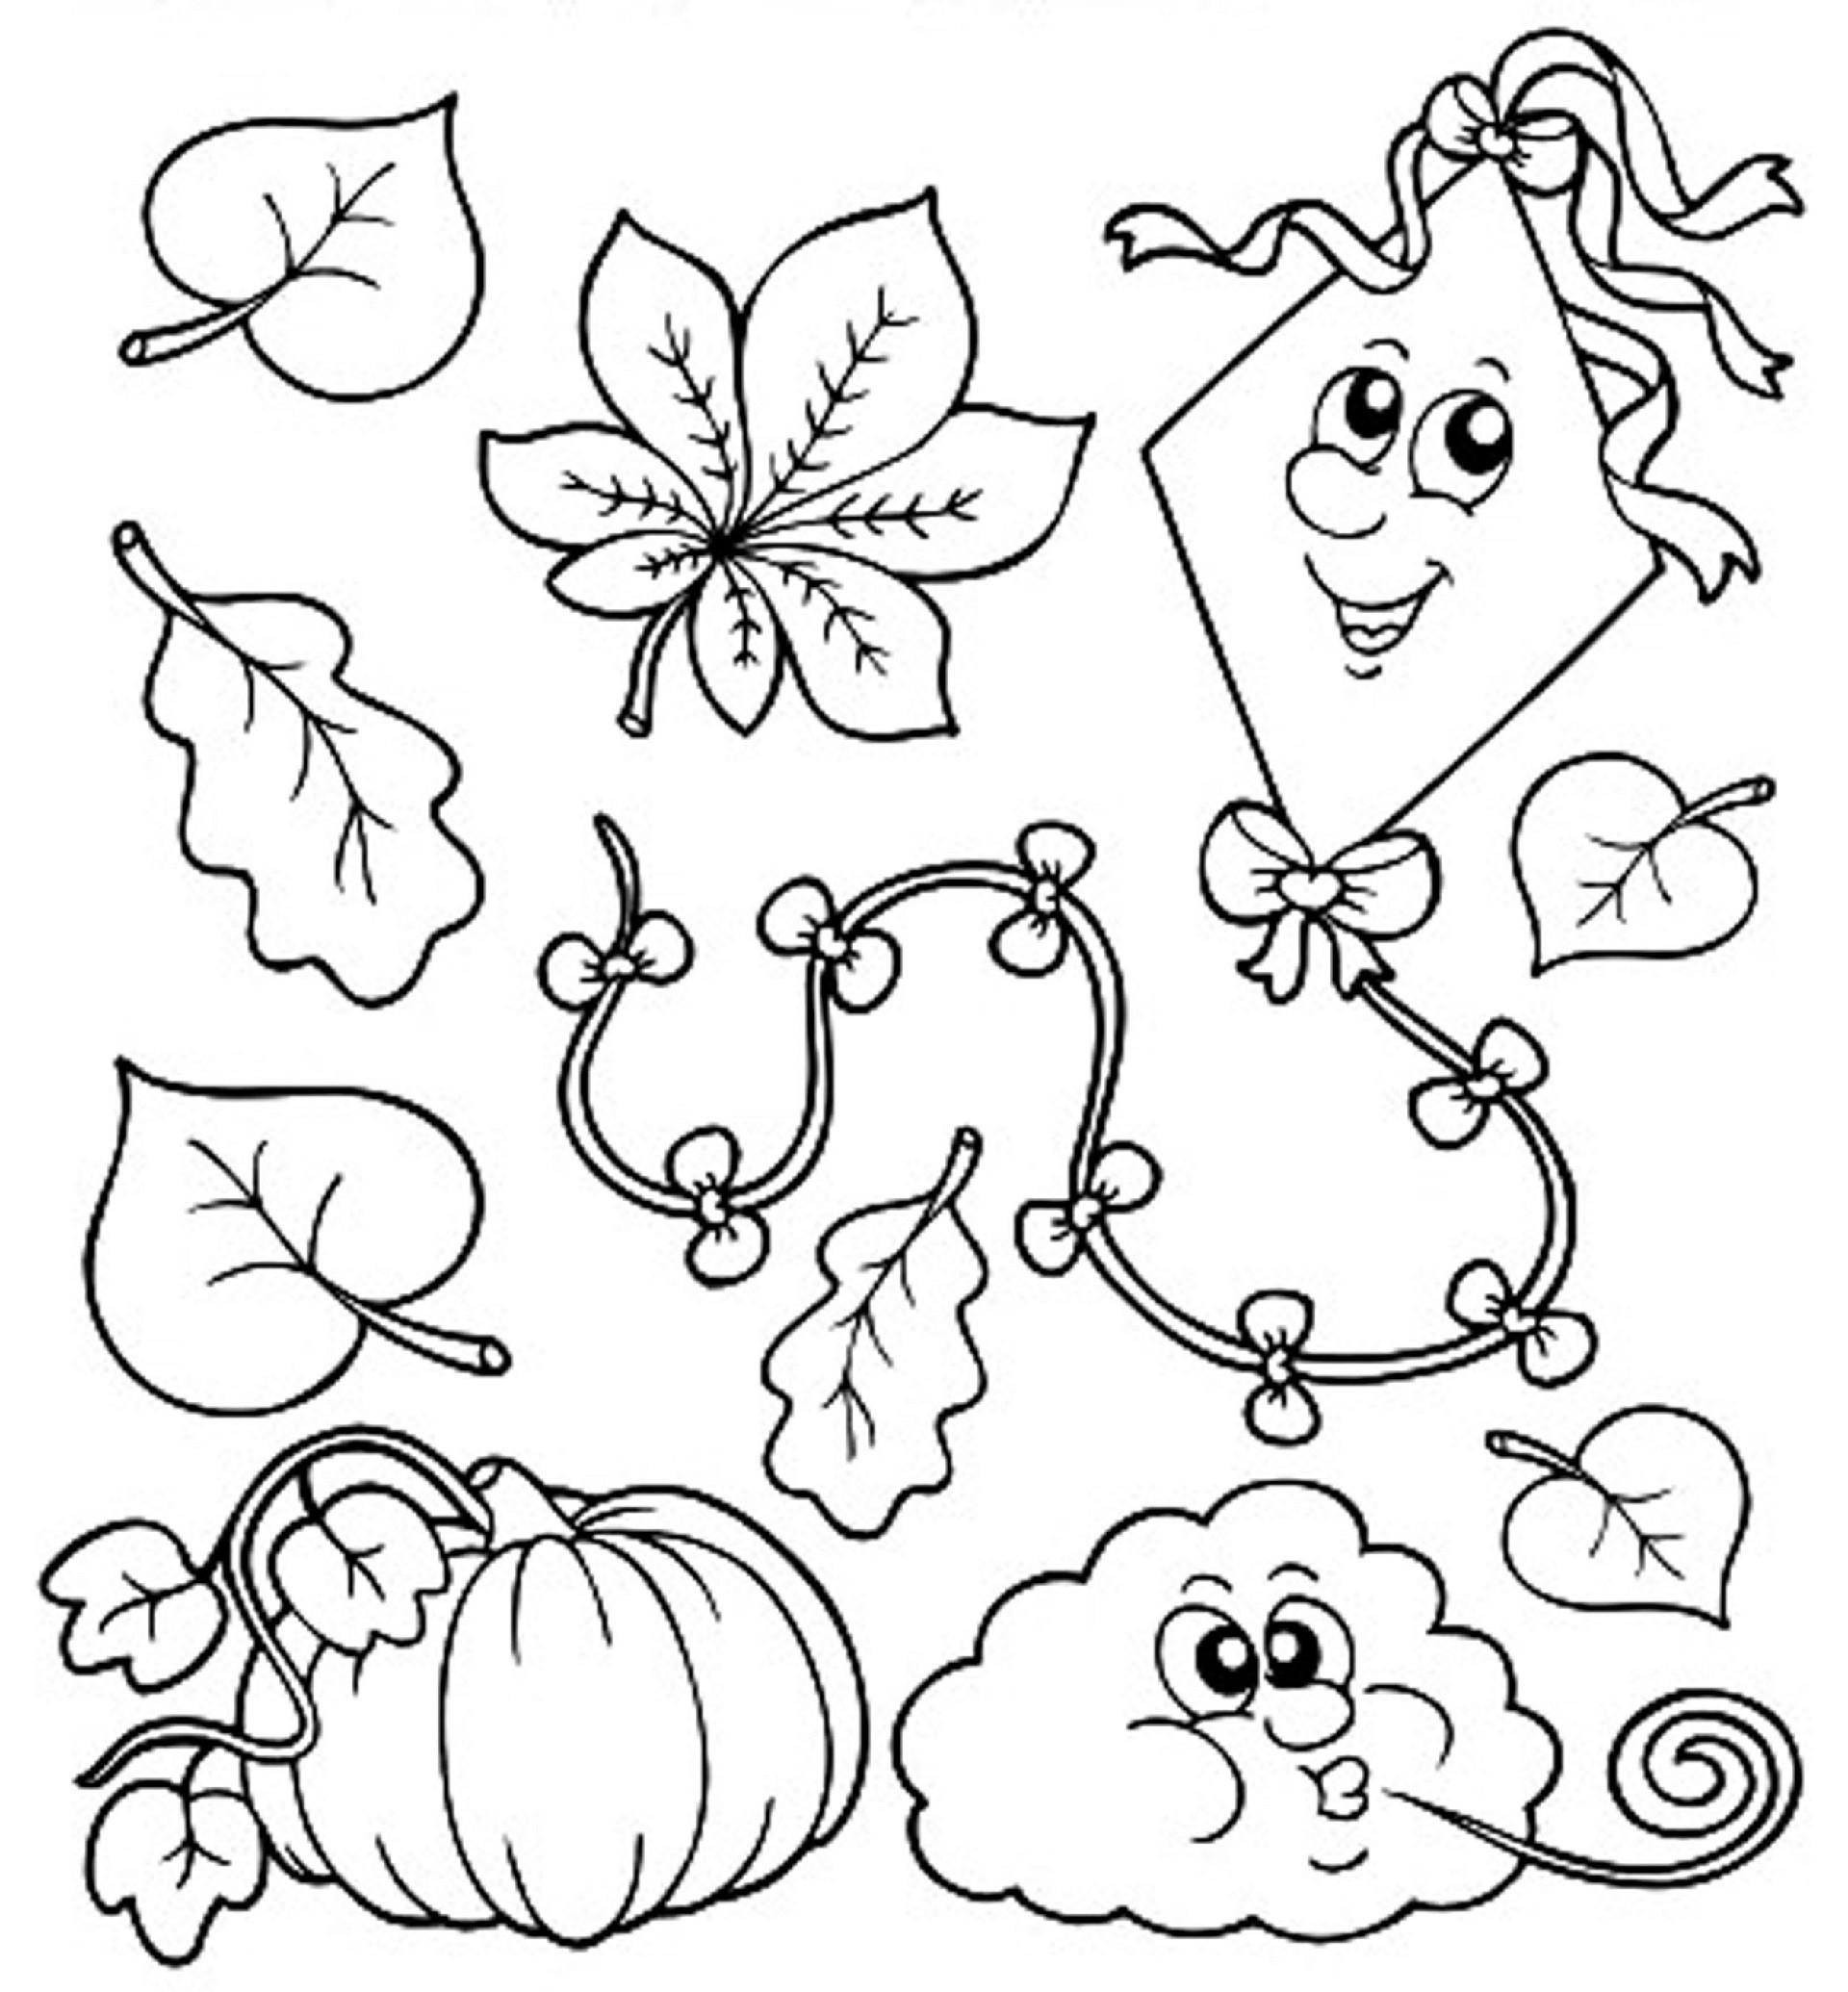 Coloring Pages For Kids Fall
 Fall Coloring Pages for Kindergarten